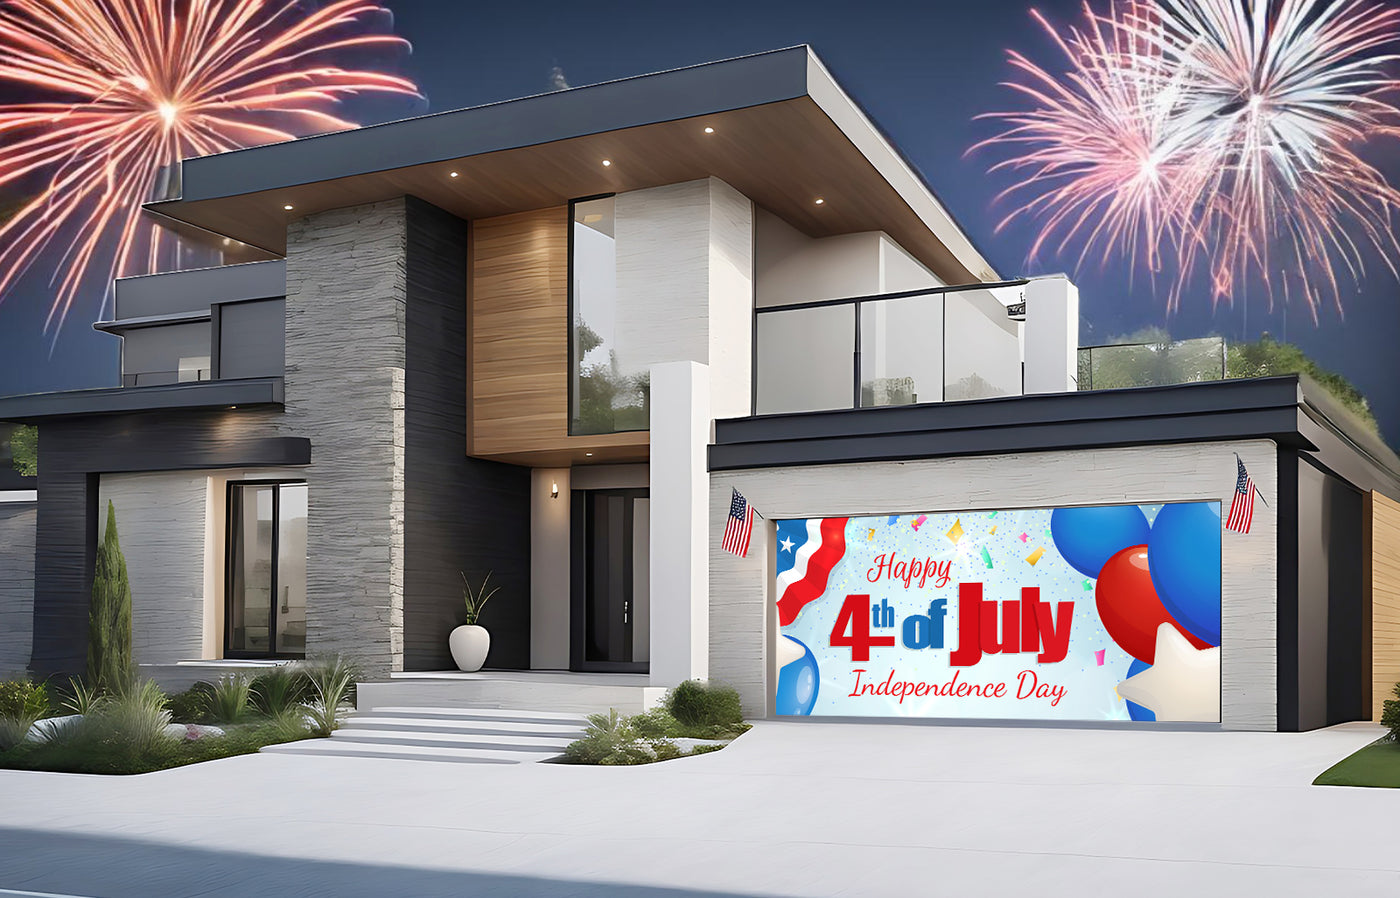 Happy 4th of July, Independence Day With Balloons Garage Door Cover Banner